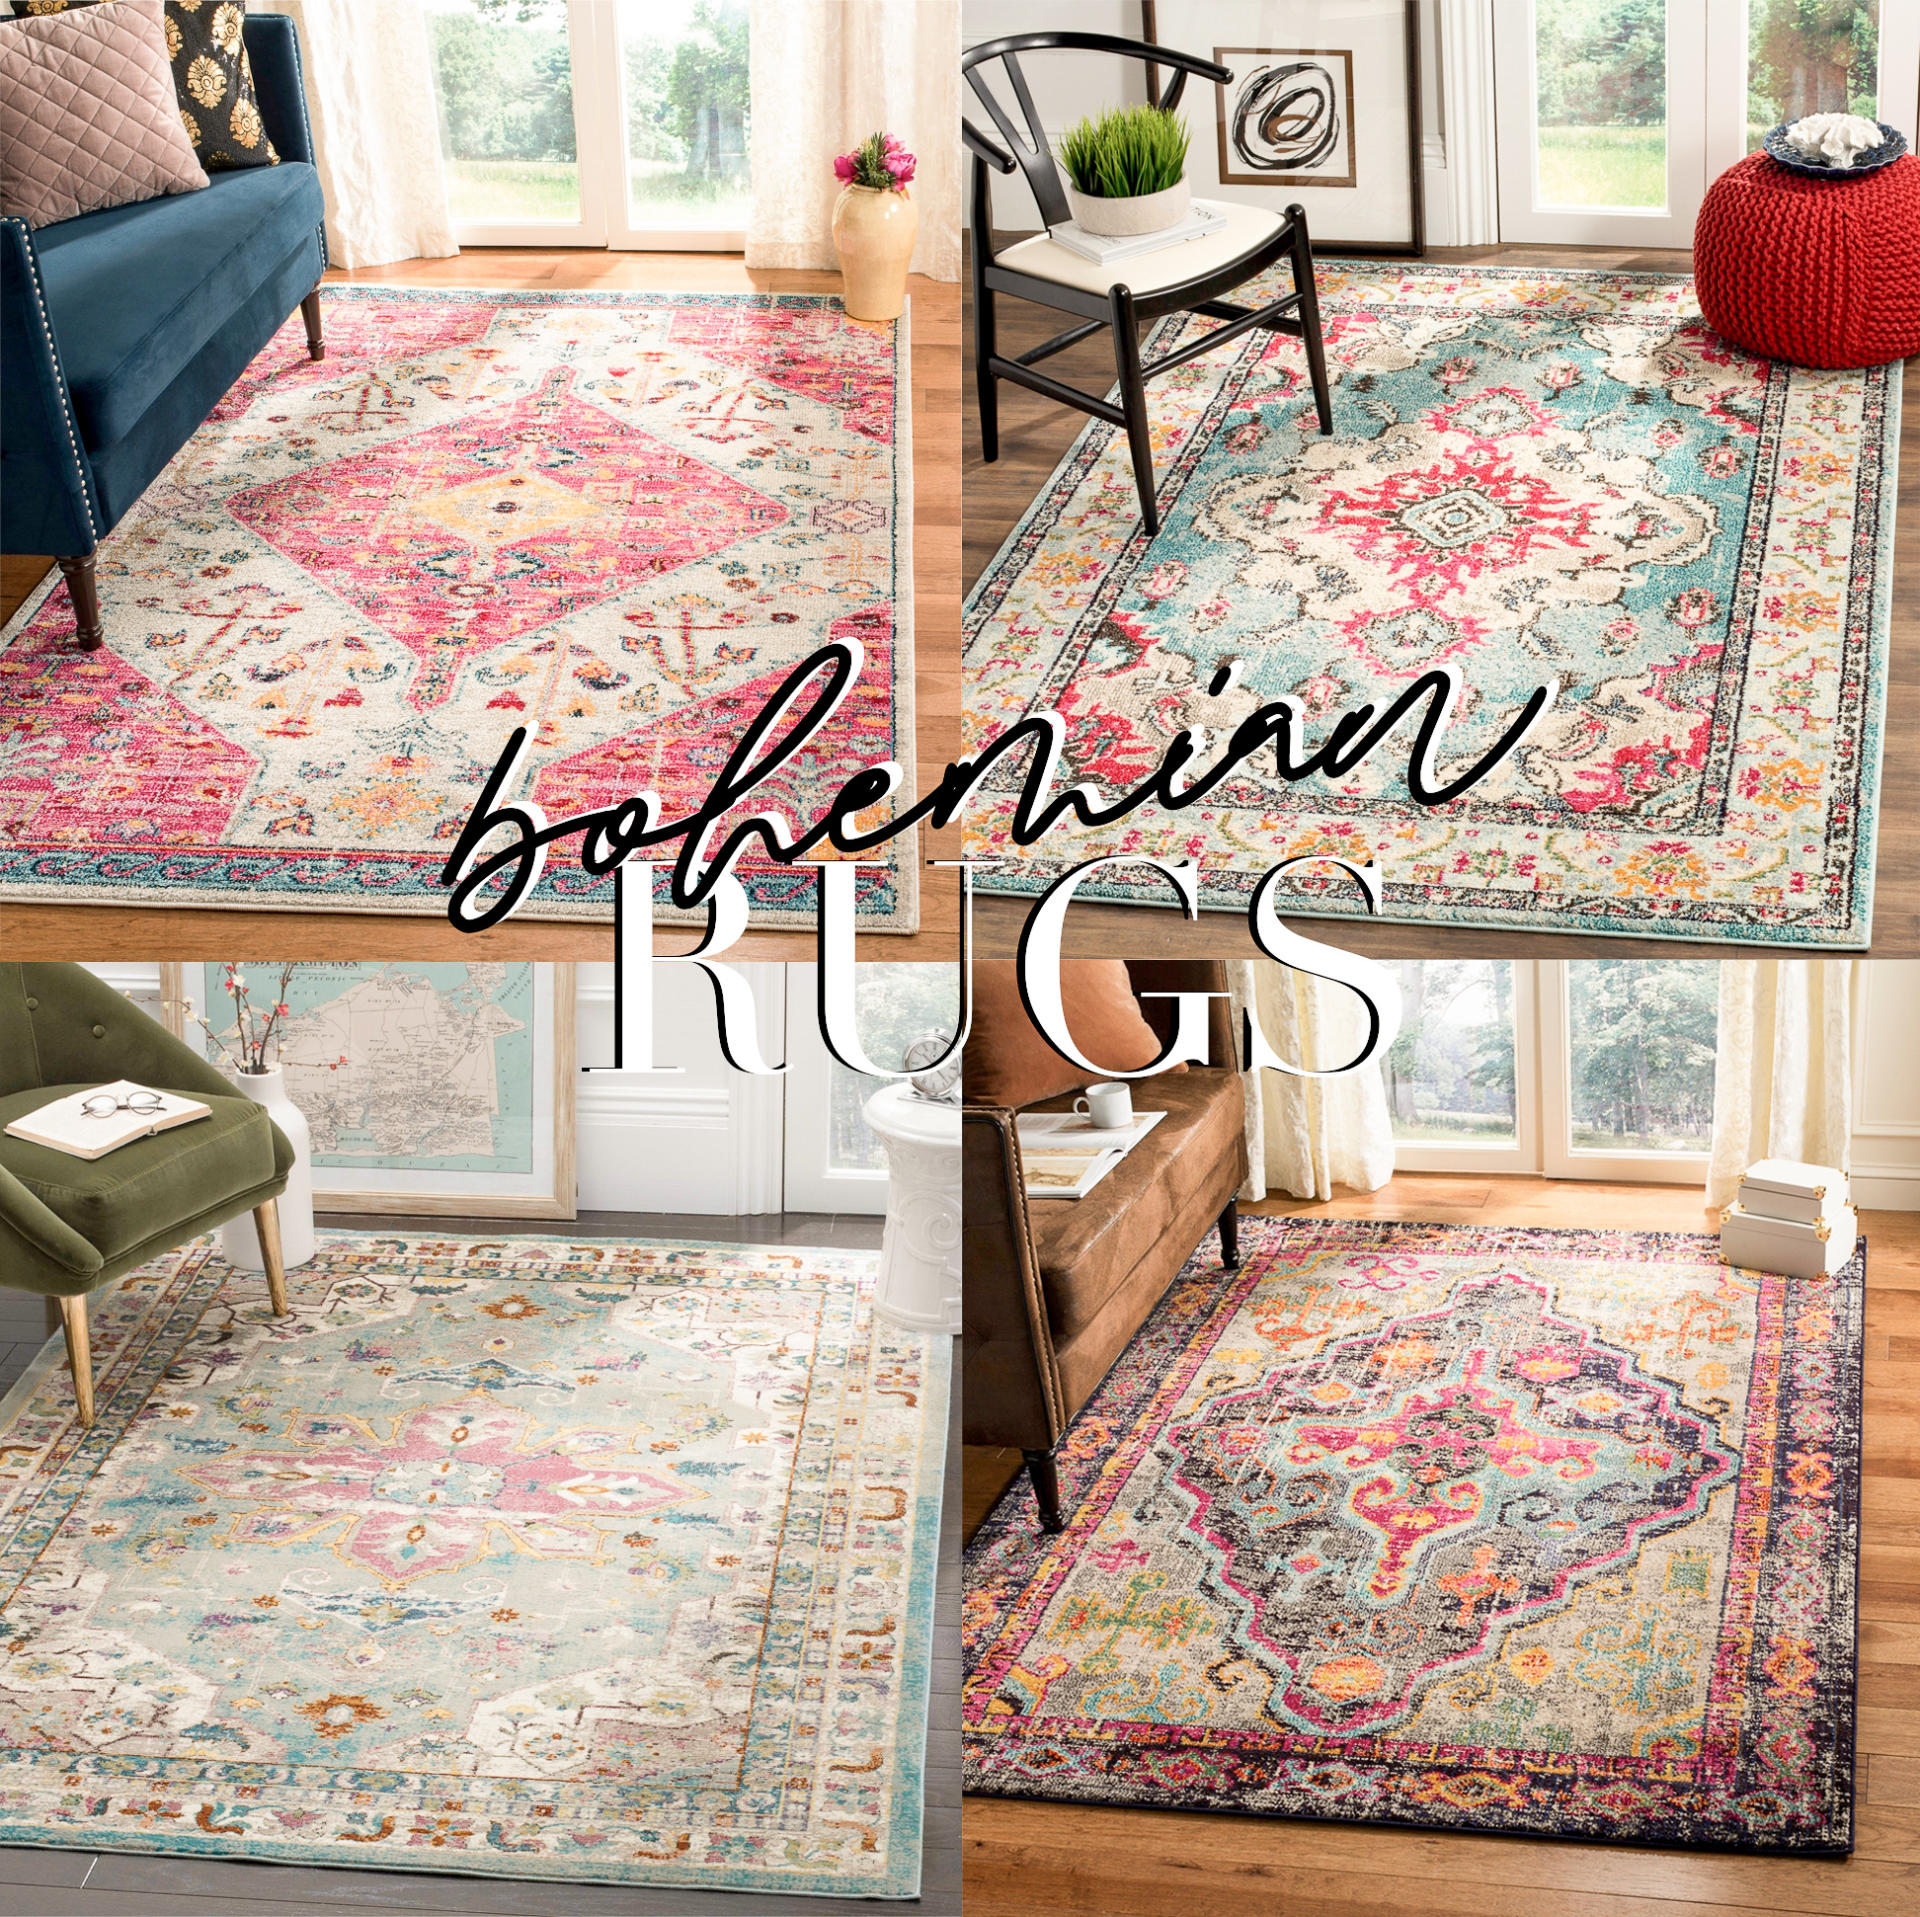 Large Bohemian Area Rugs Under $300